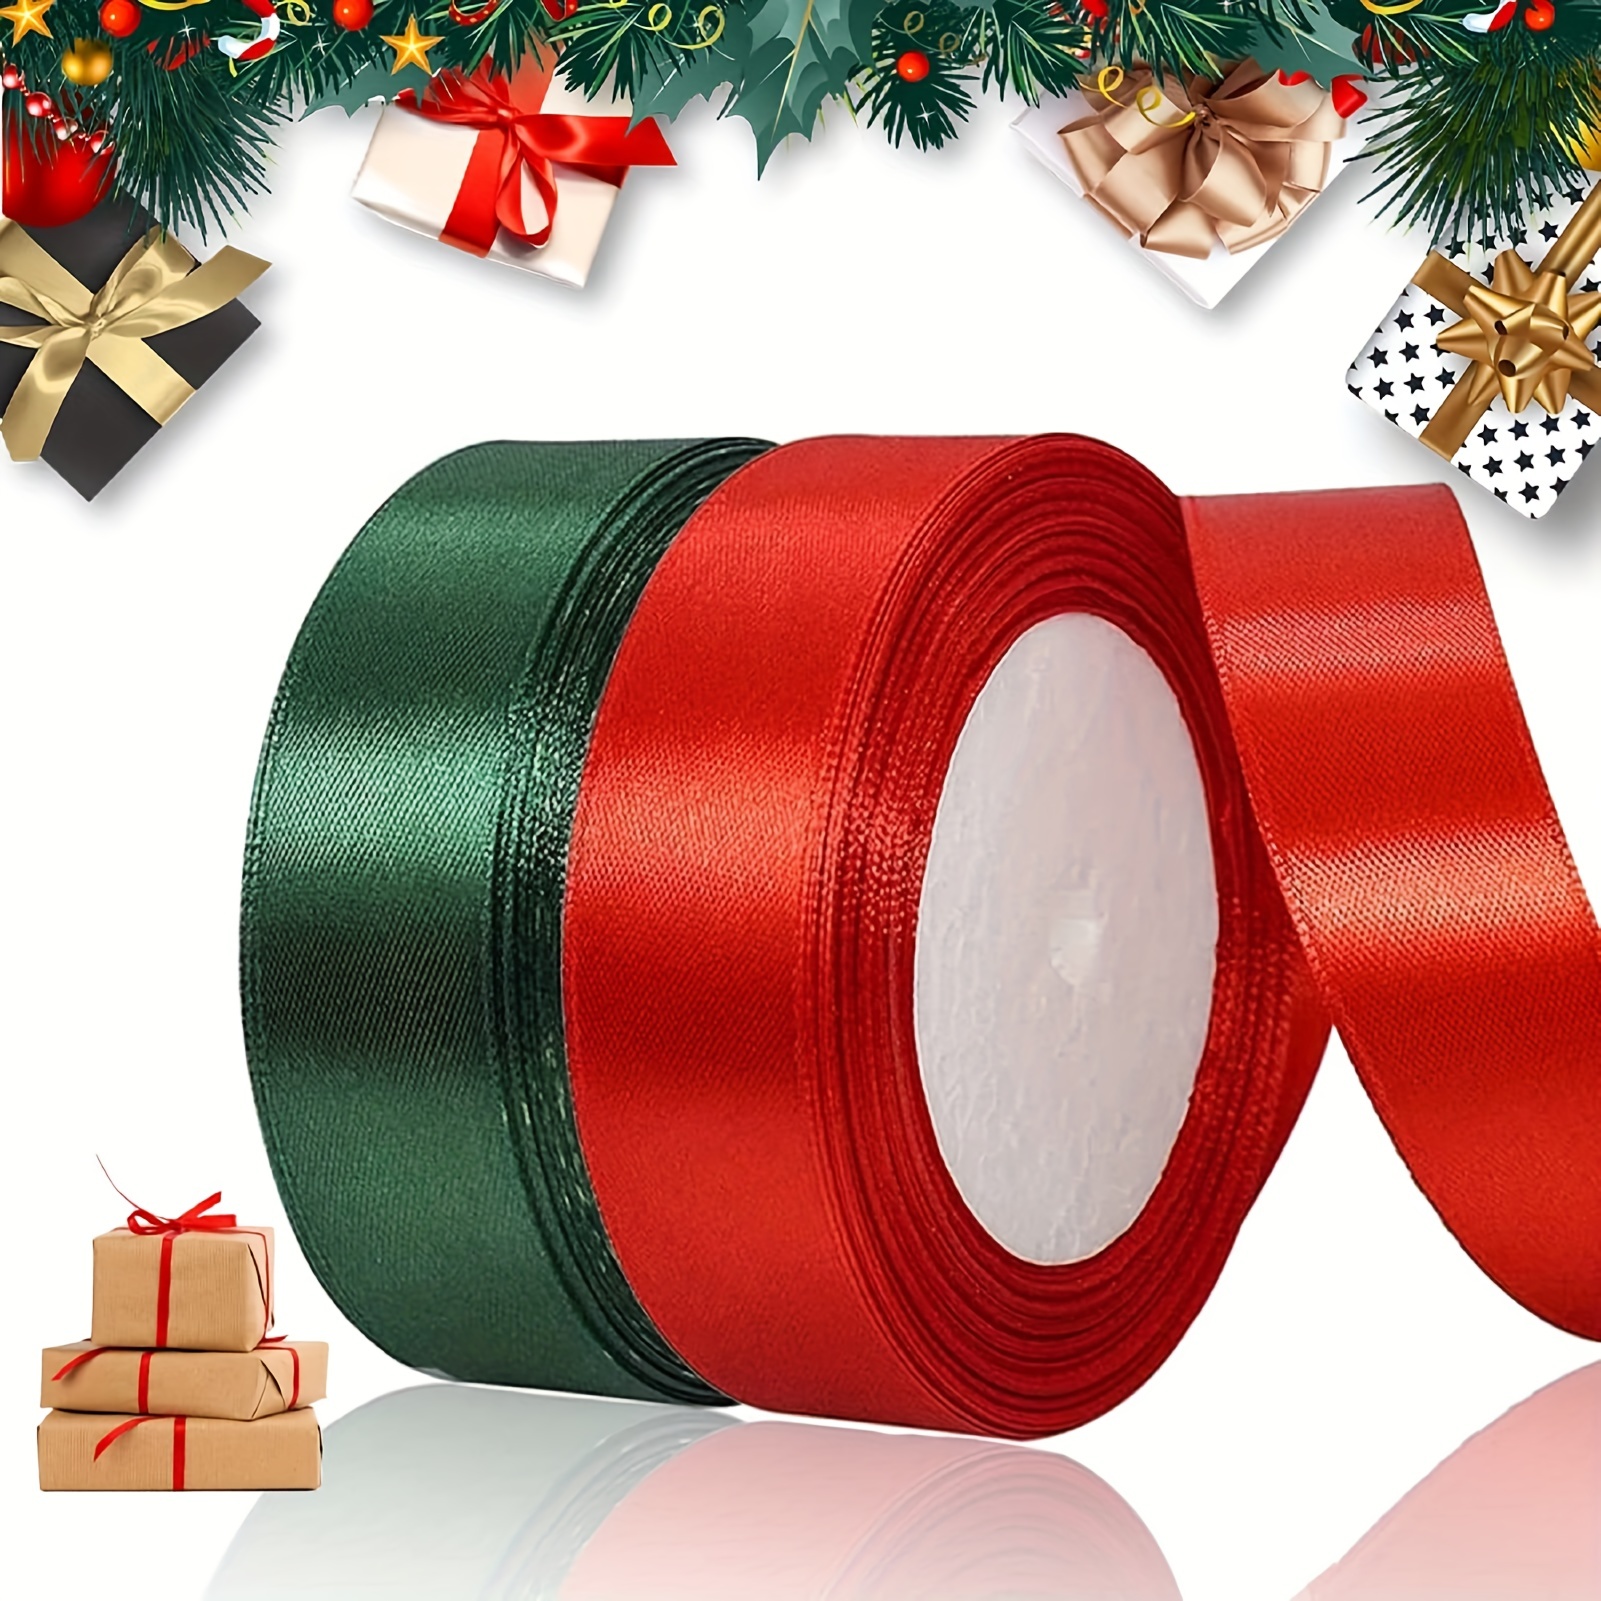 100 Yards Christmas Ribbons Gift Wrapping Ribbons Christmas Satin Ribbons  for Wedding Wrapping Sewing Bow Wreath DIY Craft (10 mm and 15 mm, Red and